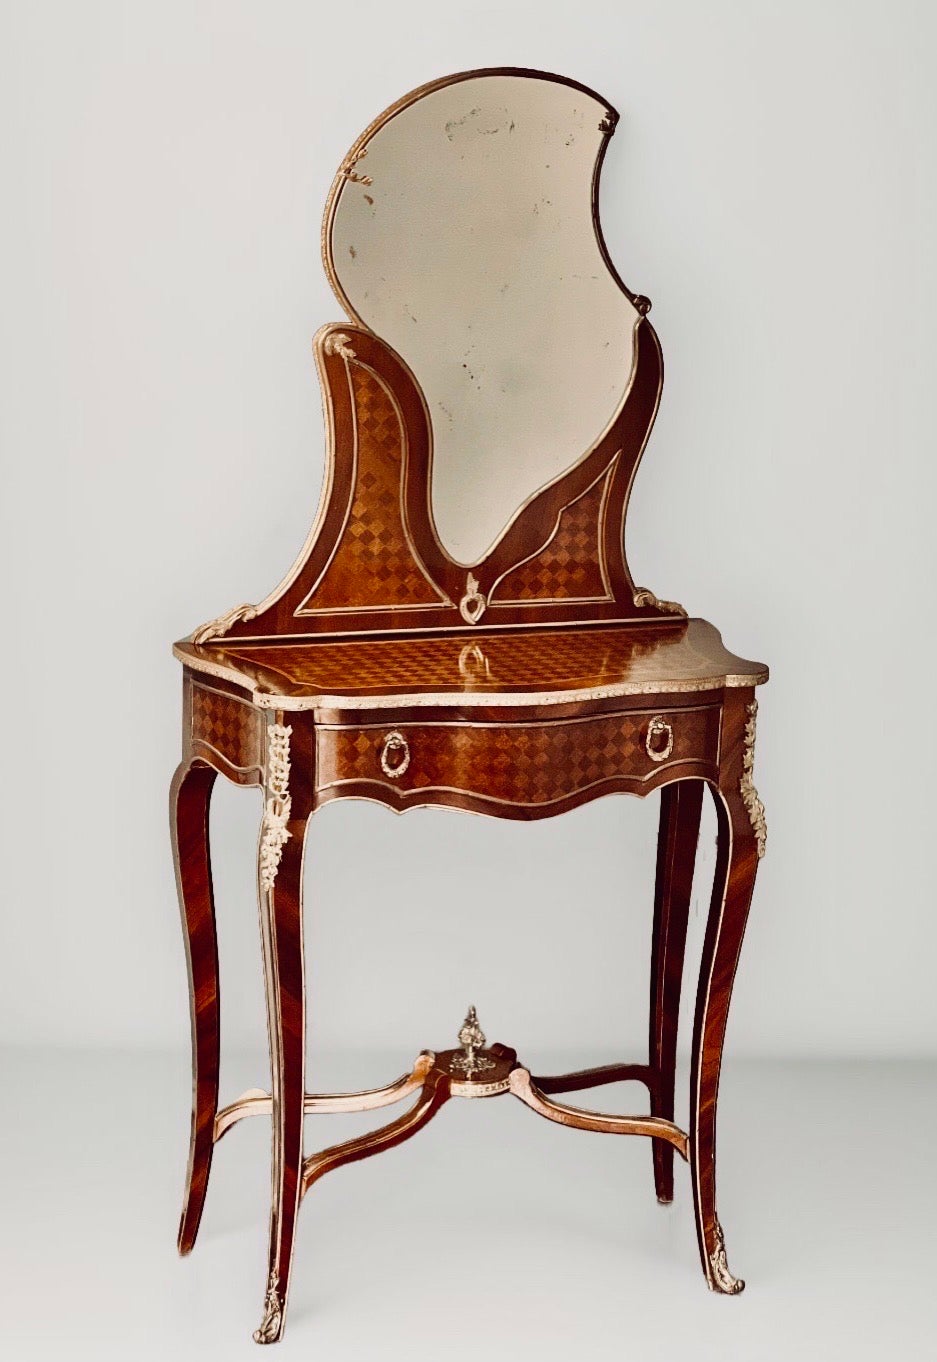 French Louis XV style ormolu-mounted kingwood and satinwood parquetry dressing table or coiffeuse, late 19th century.

Incredibly luxurious petite dressing table inlaid with trellis parquetry and draped in ormolu. It features an ormolu framed and